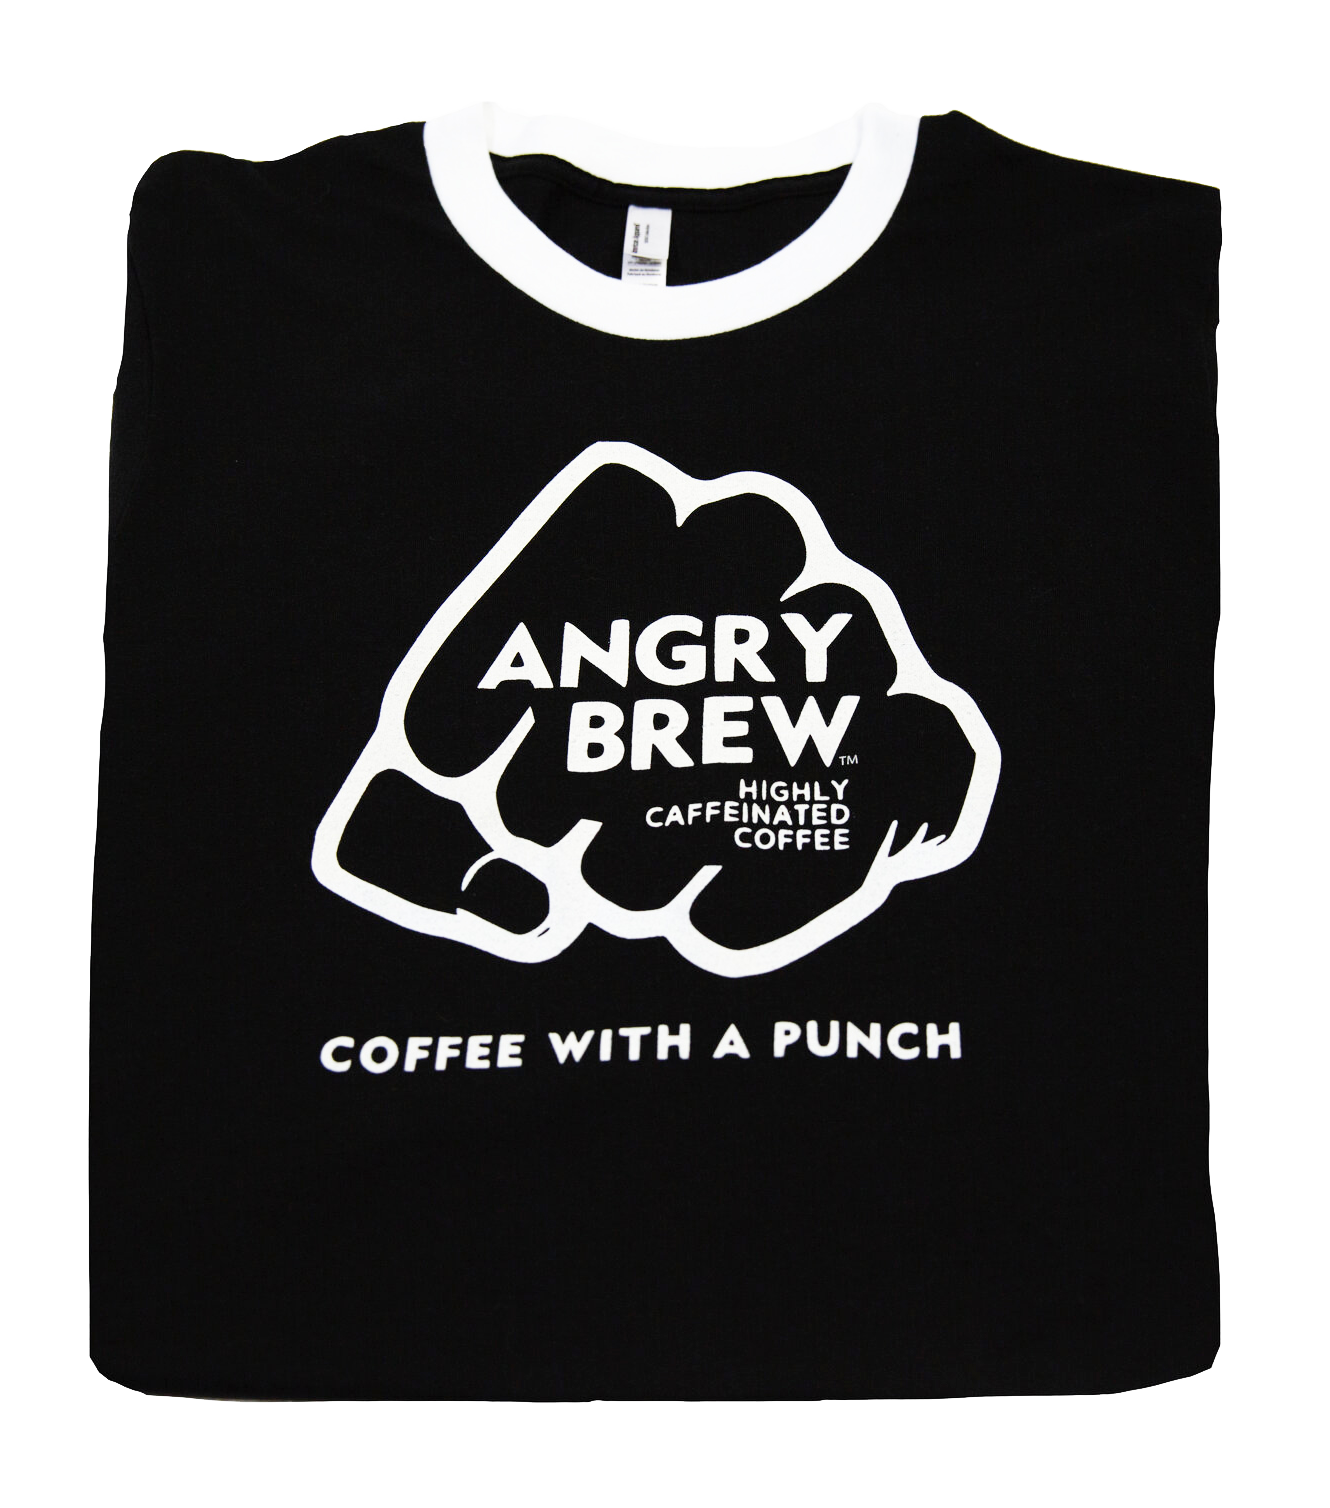 Angry Brew t-shirt